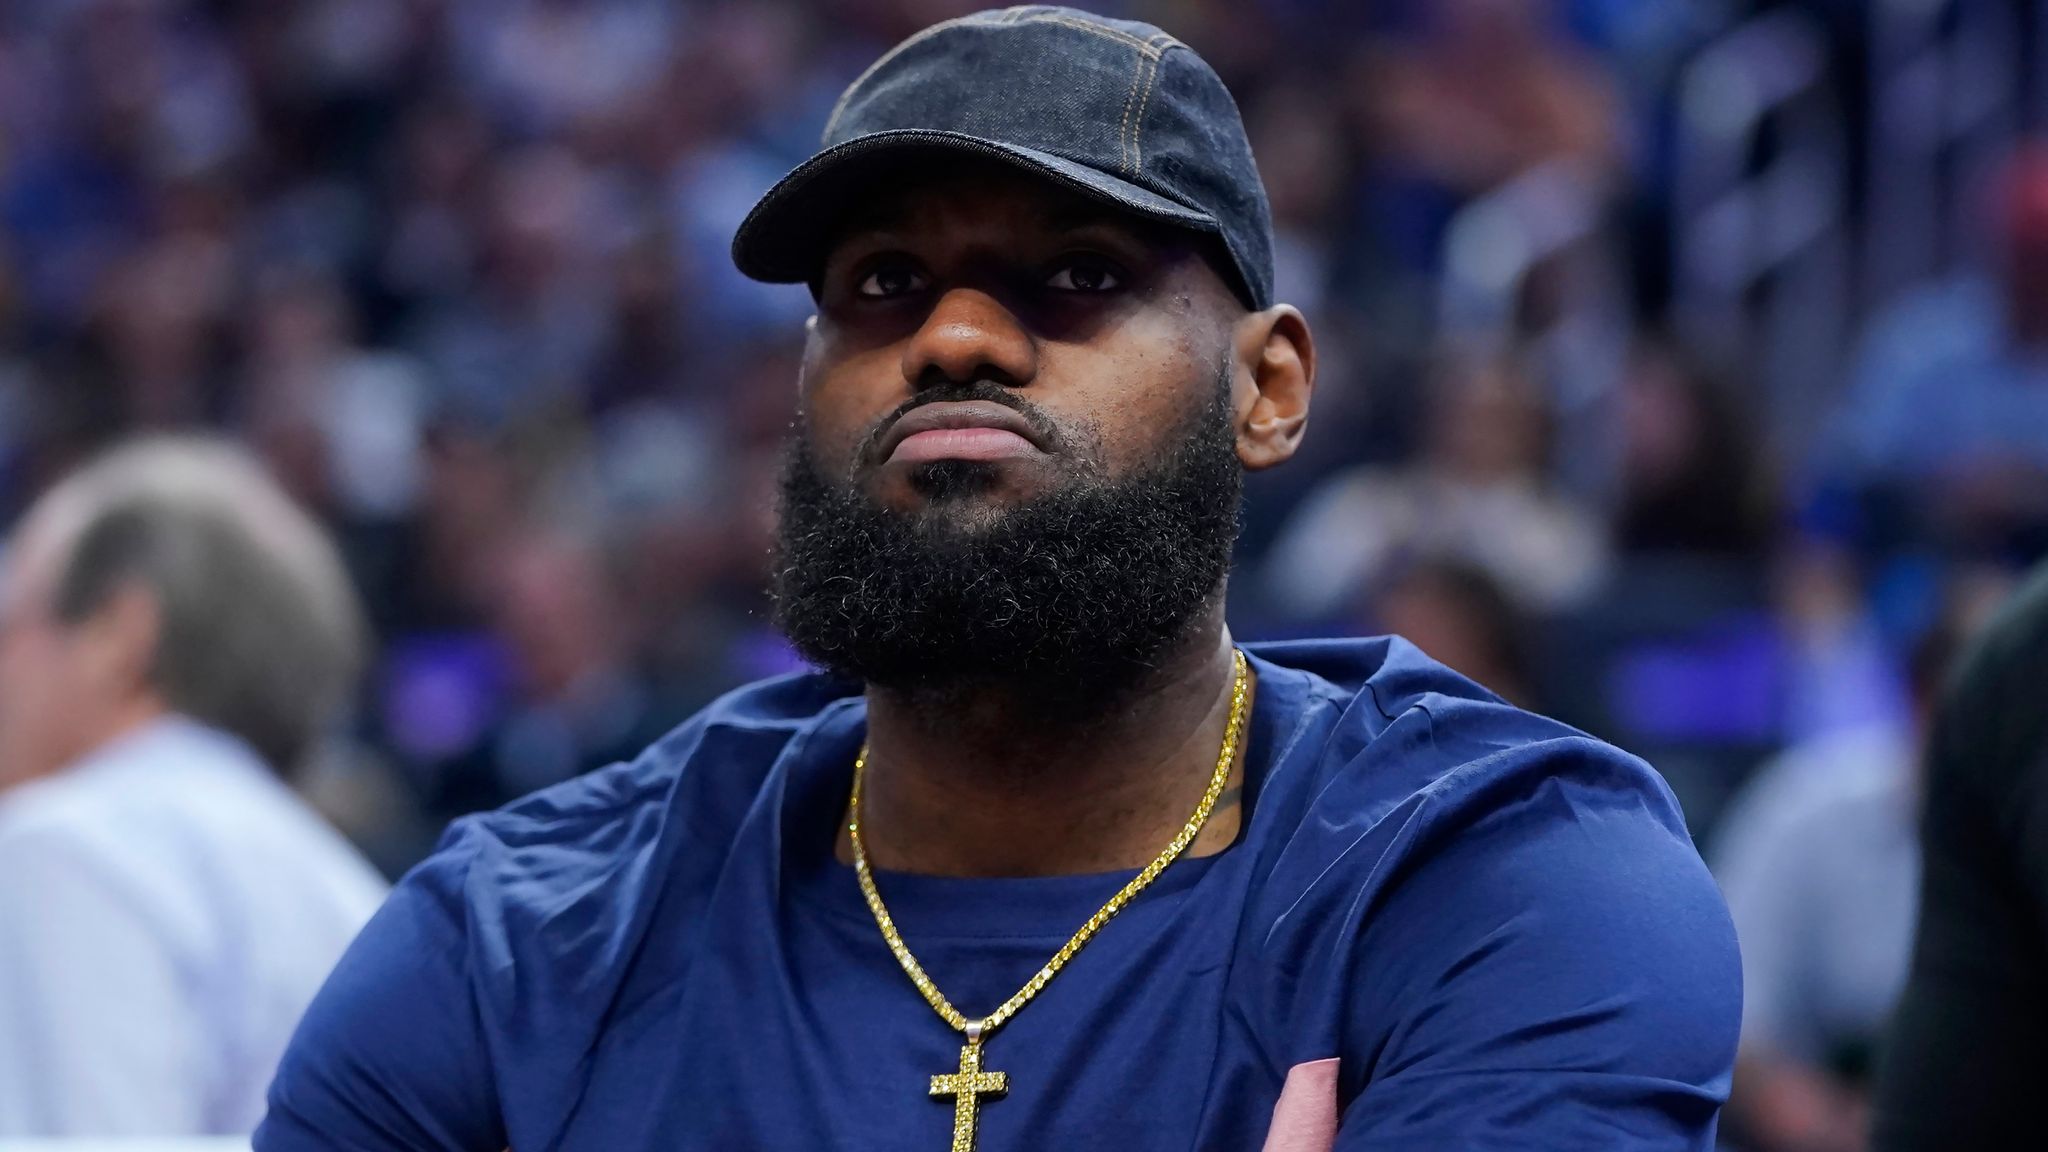 LeBron won't wear social justice message on Lakers jersey | KOIN.com